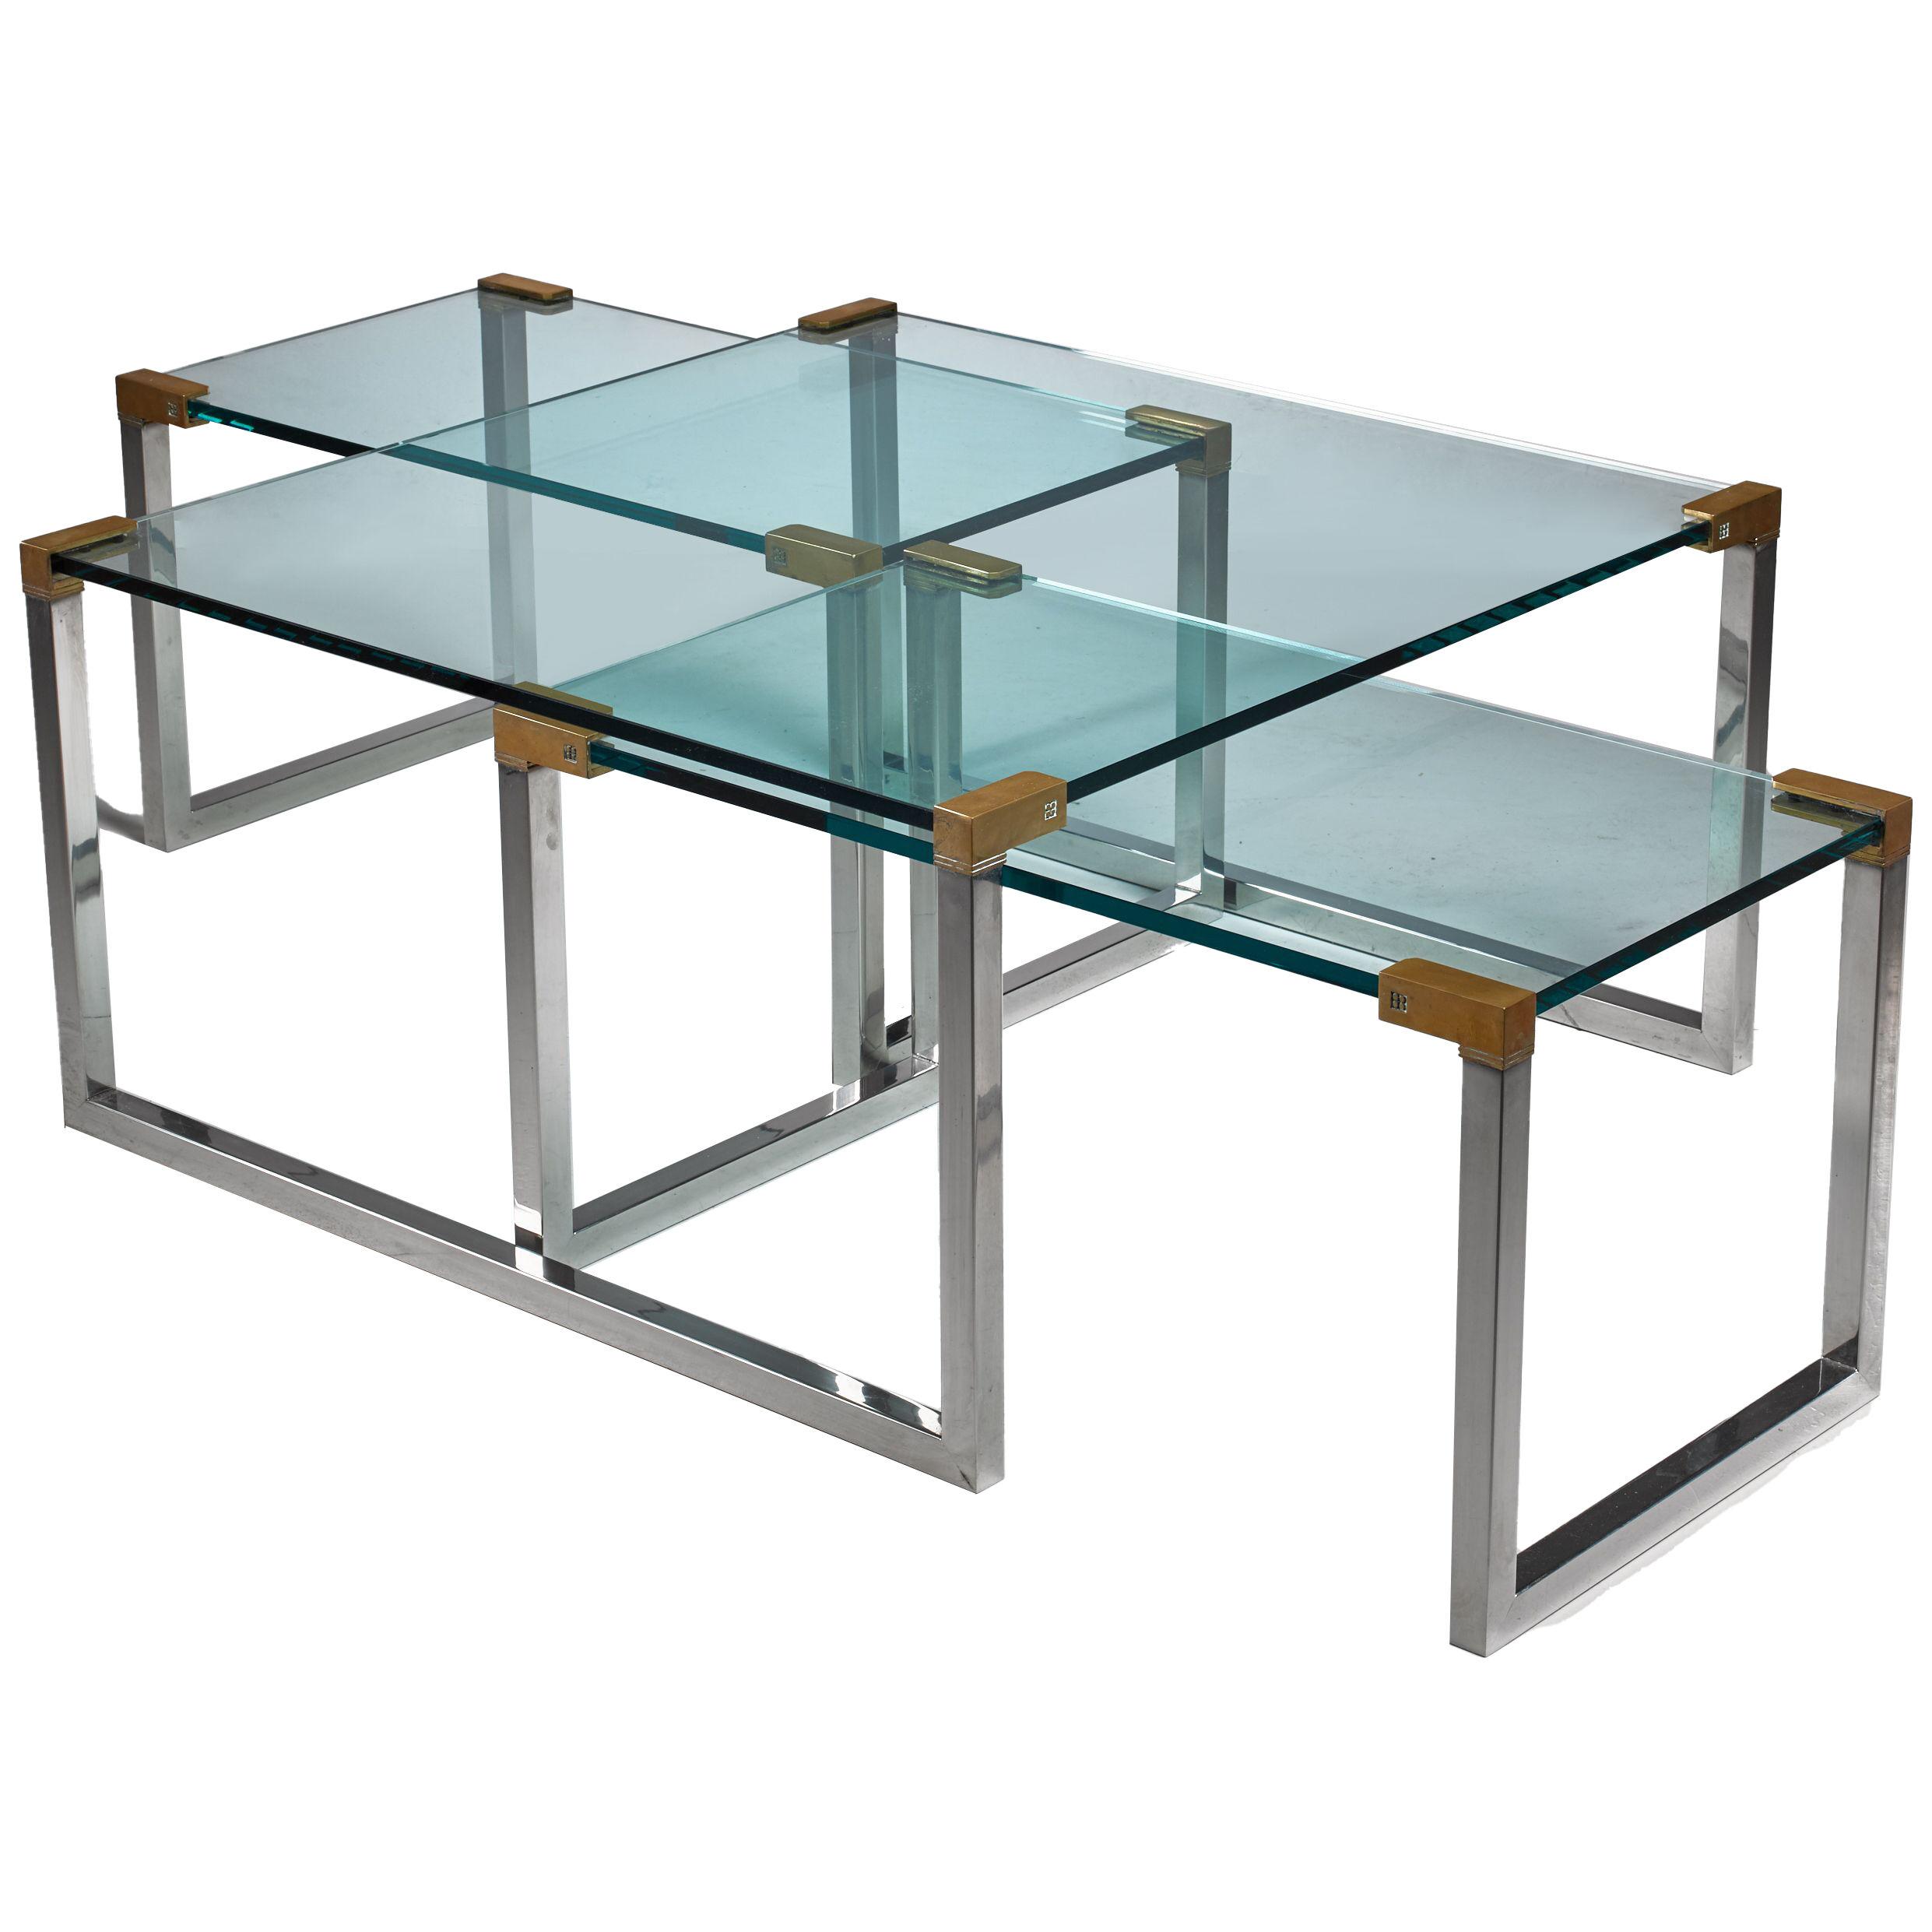 Peter Ghyczy Set of 3 Modular Glass, Brass and Chrome Tables, Netherlands, 1970s